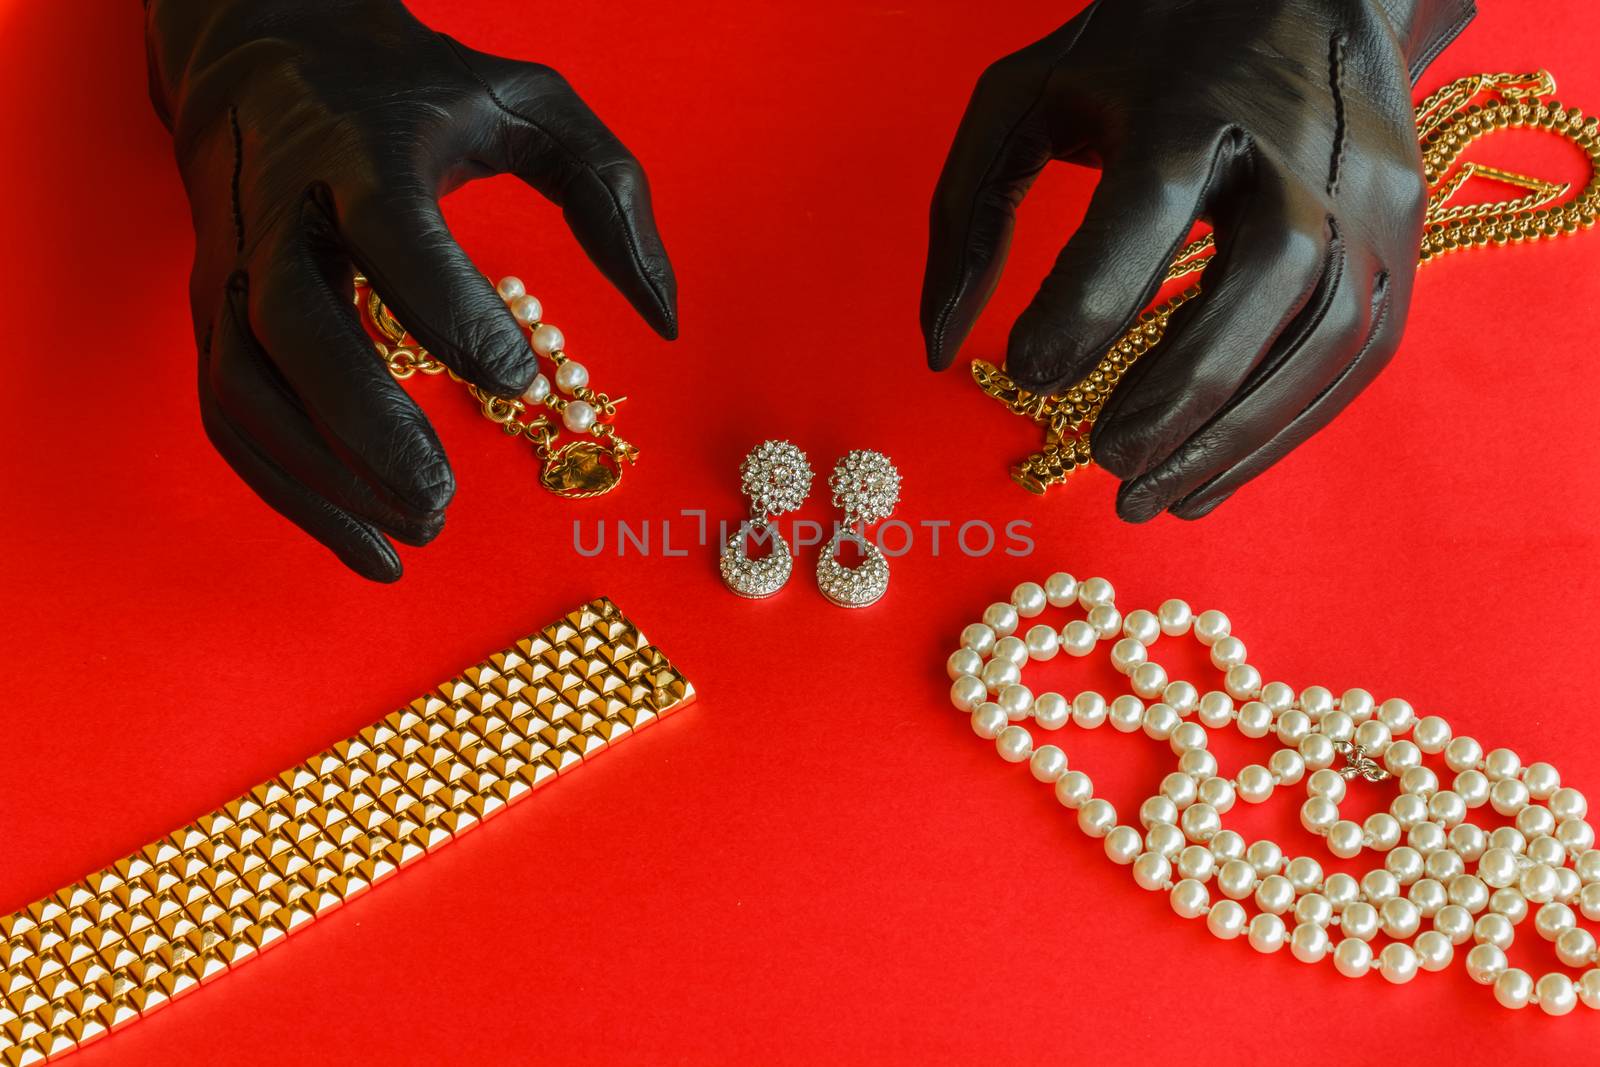 two hands wrapped in black gloves are going to steal  a set  of necklaces,bracelets and  earrings of gold  and diamonds  placed on a red background